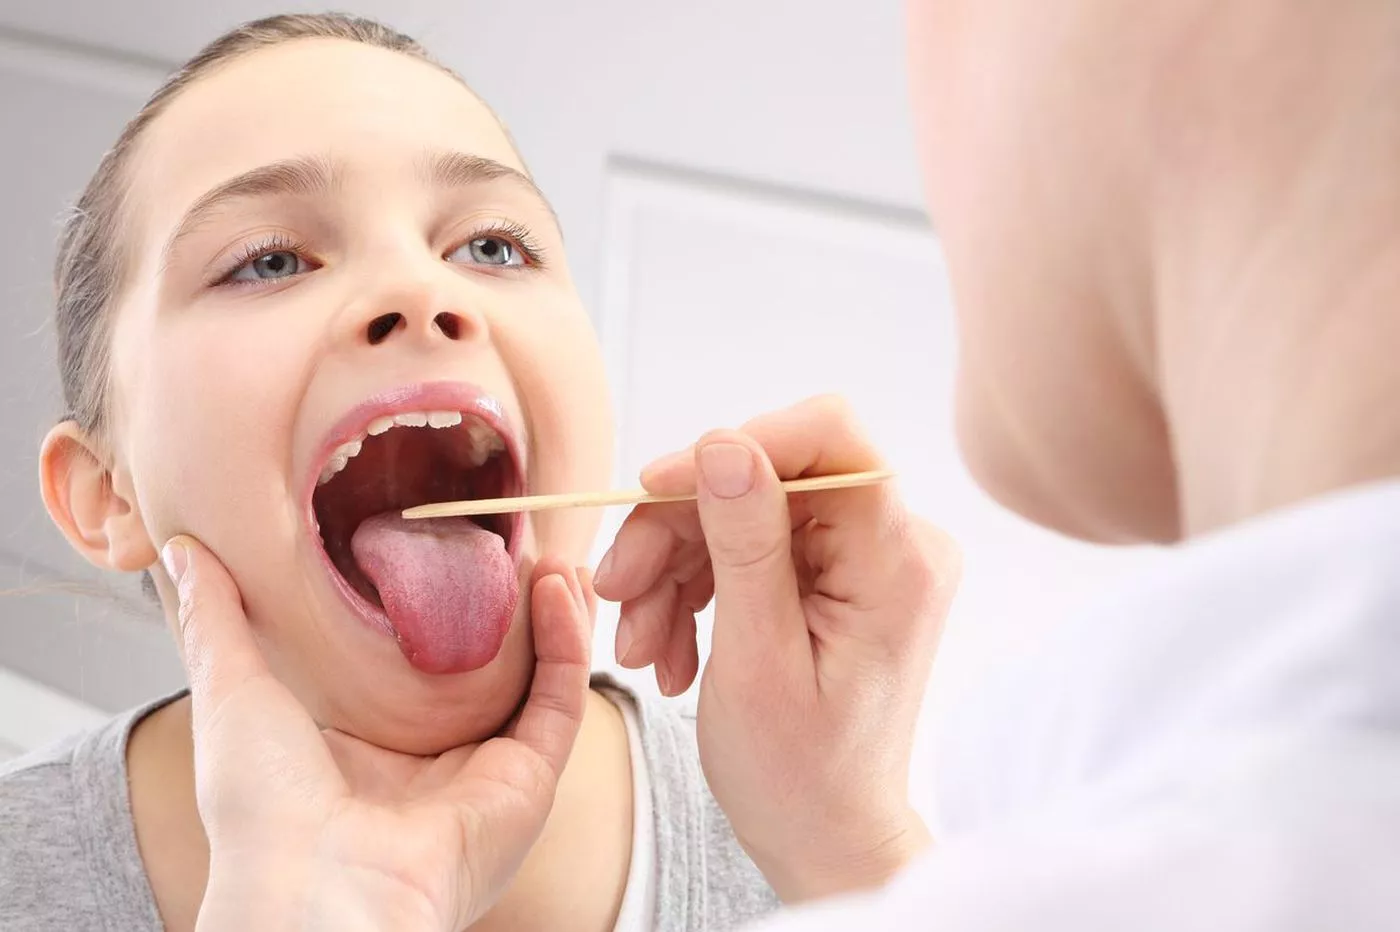 Swollen Tonsils Causes and Treatment in Children